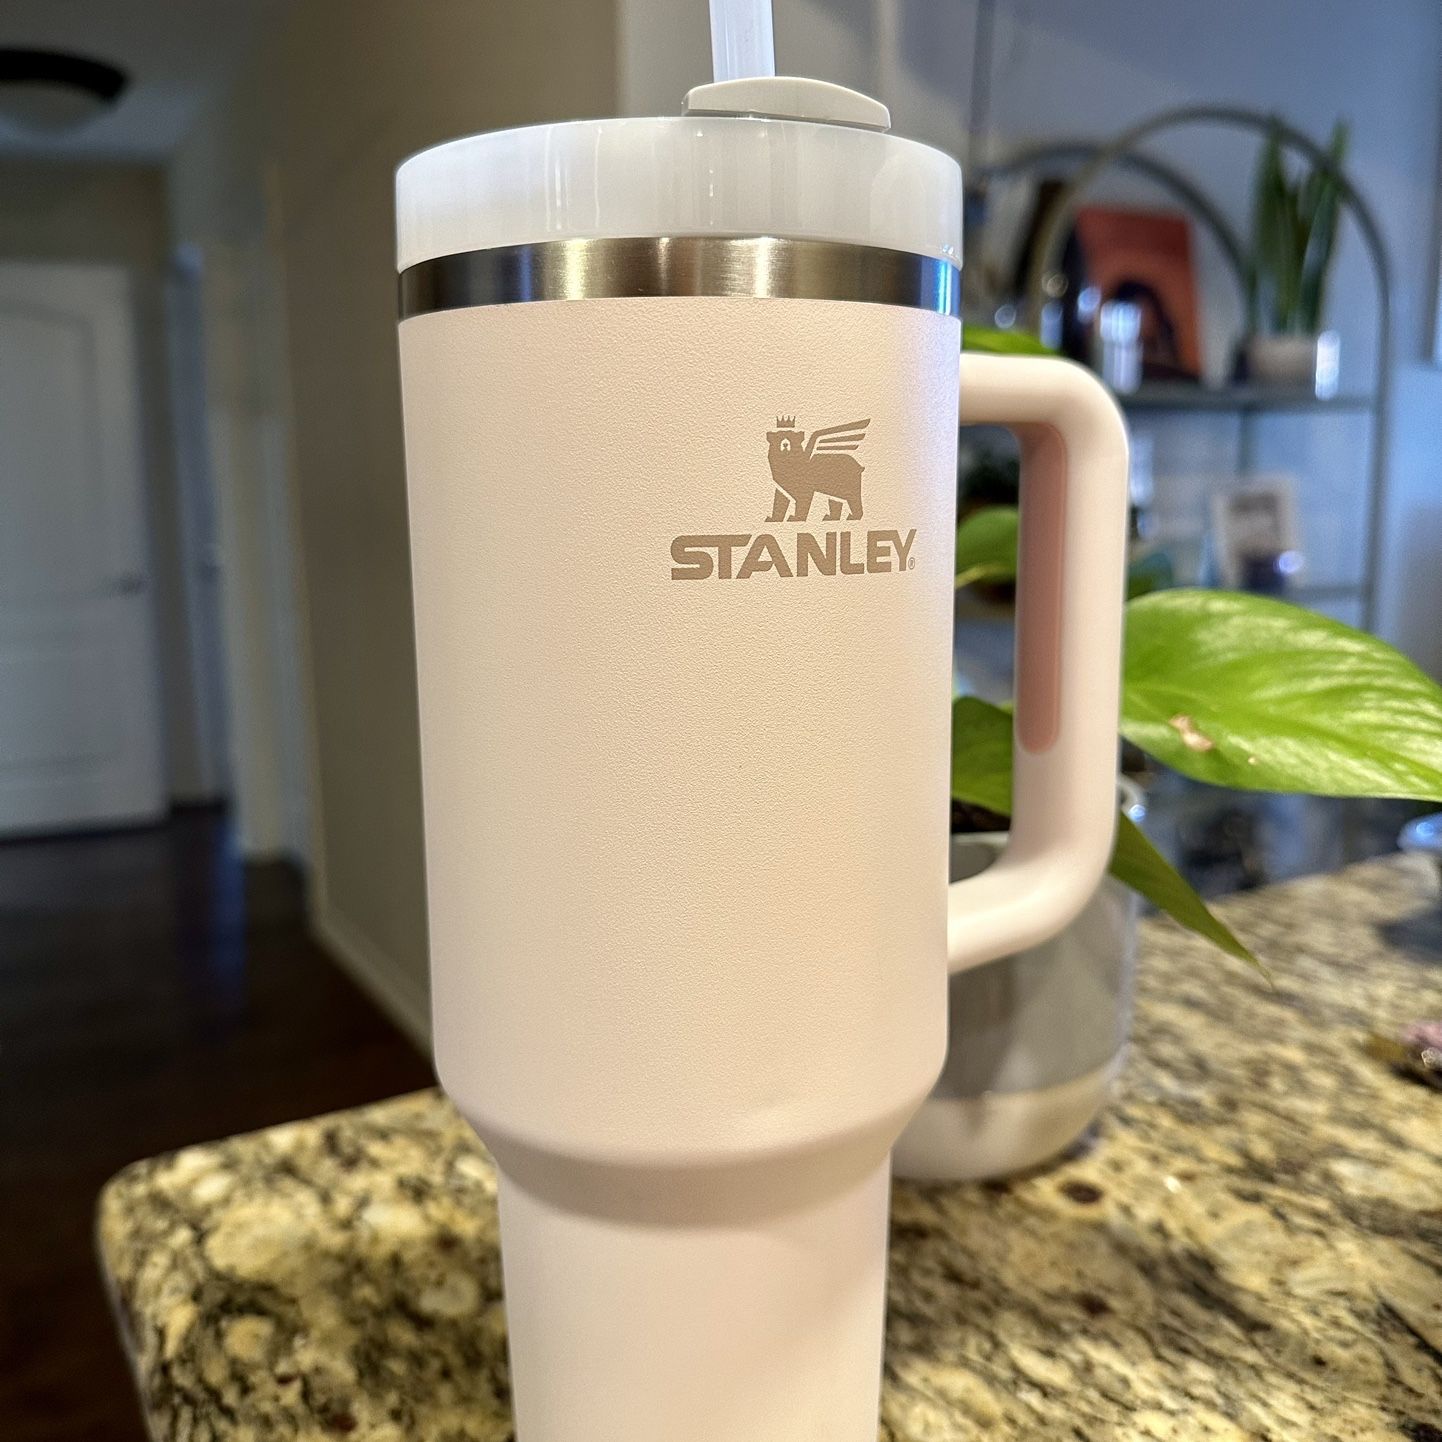 Stanley The Quencher H2.0 Flowstate 40oz Tumbler - Pink Dust for Sale in  Corpus Christi, TX - OfferUp